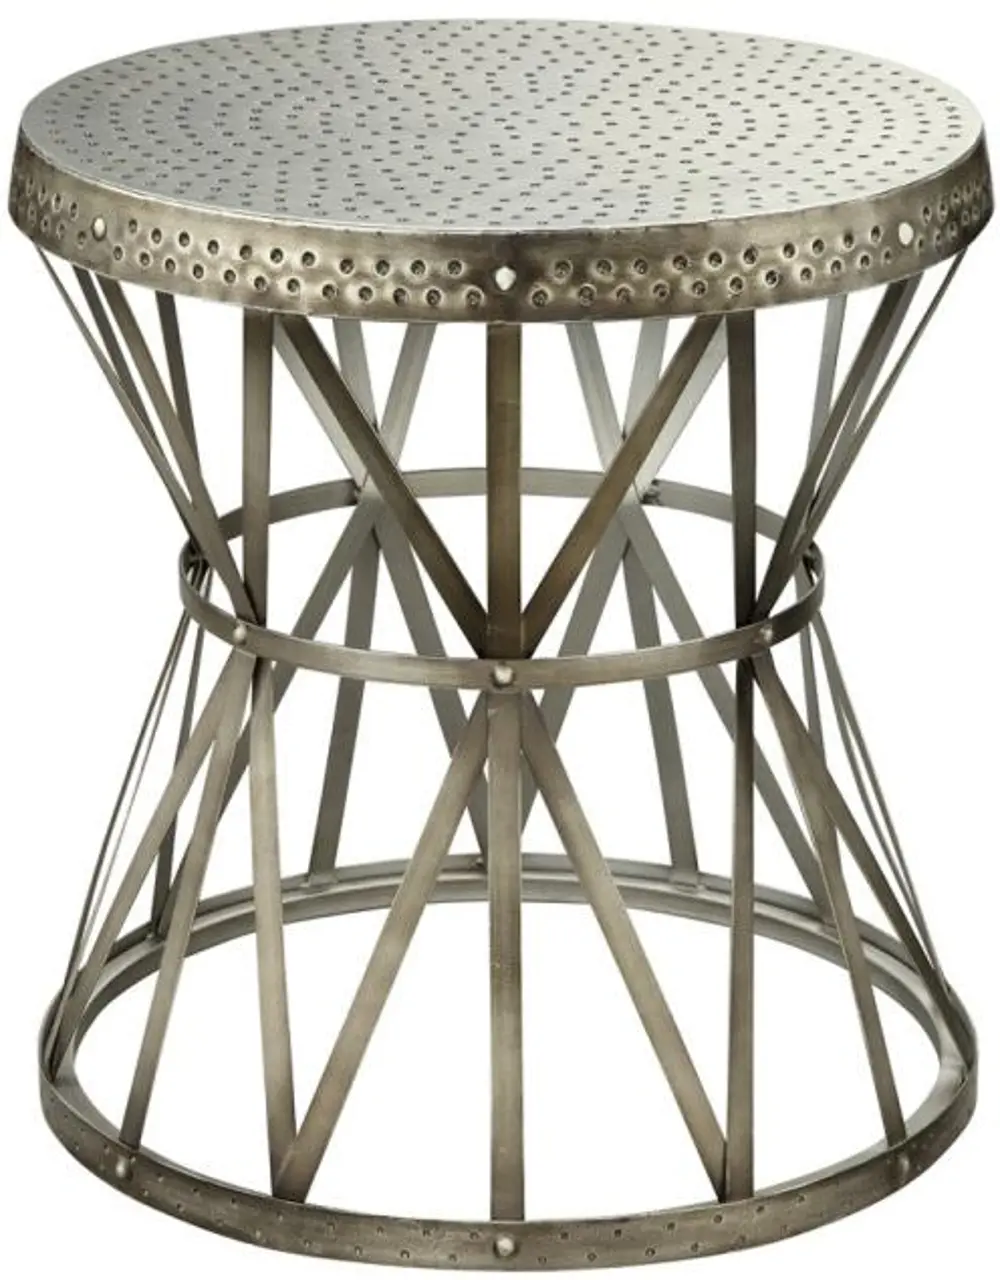 43329/ACCENT/TBL Hammered Top Antique Nickel Metal Accent Table-1